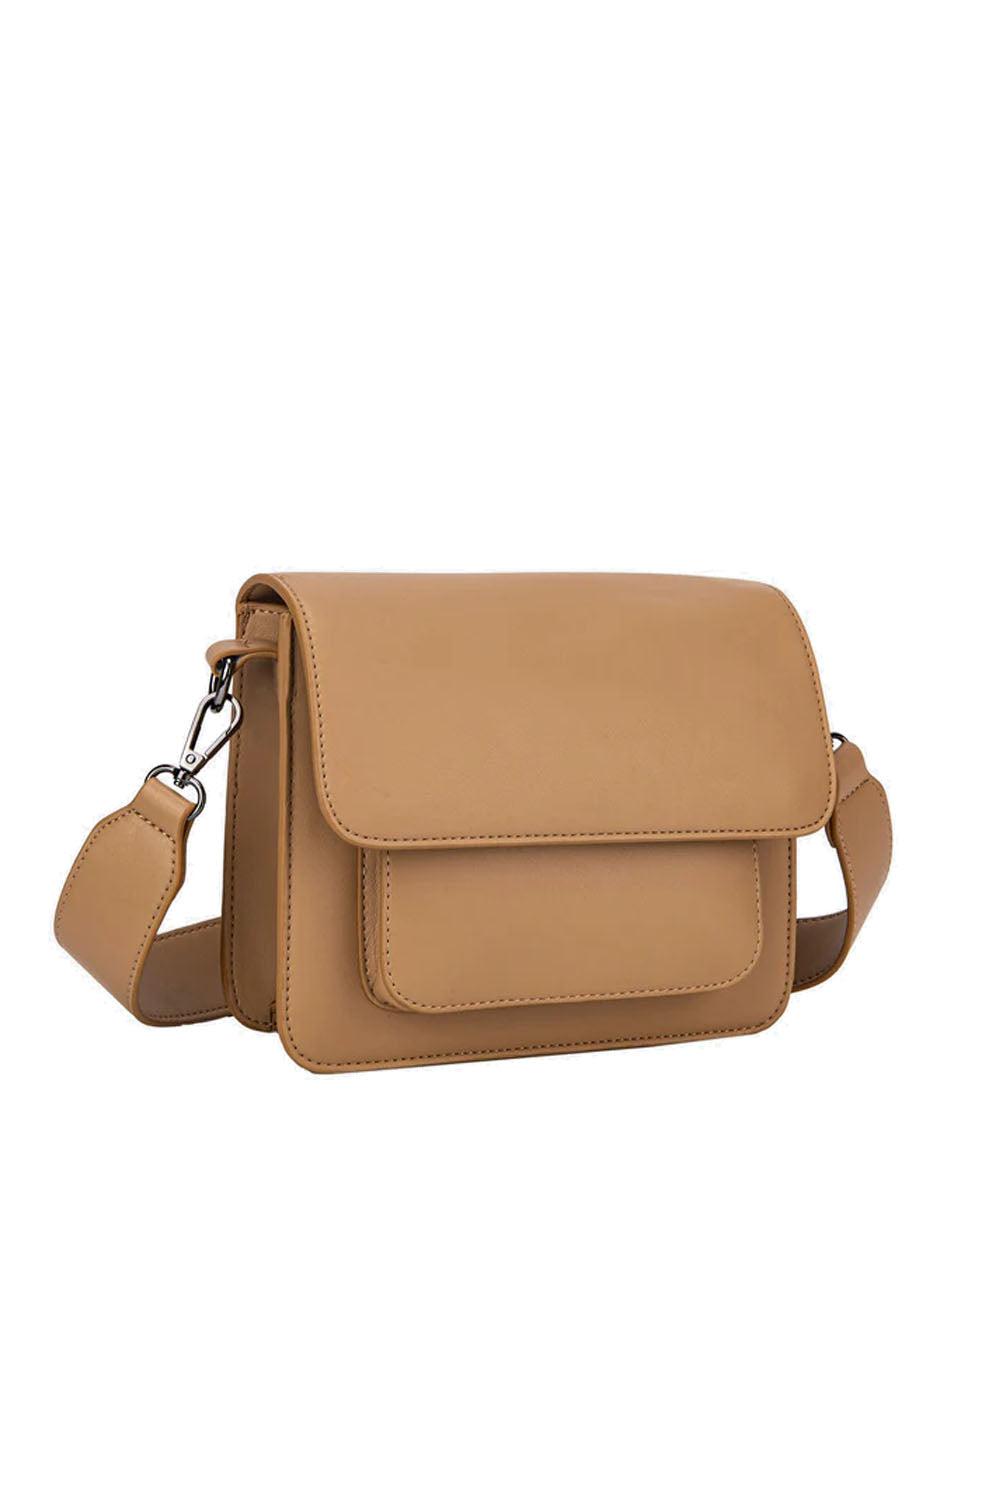 Cayman Pocket Soft Structure Tan Brown